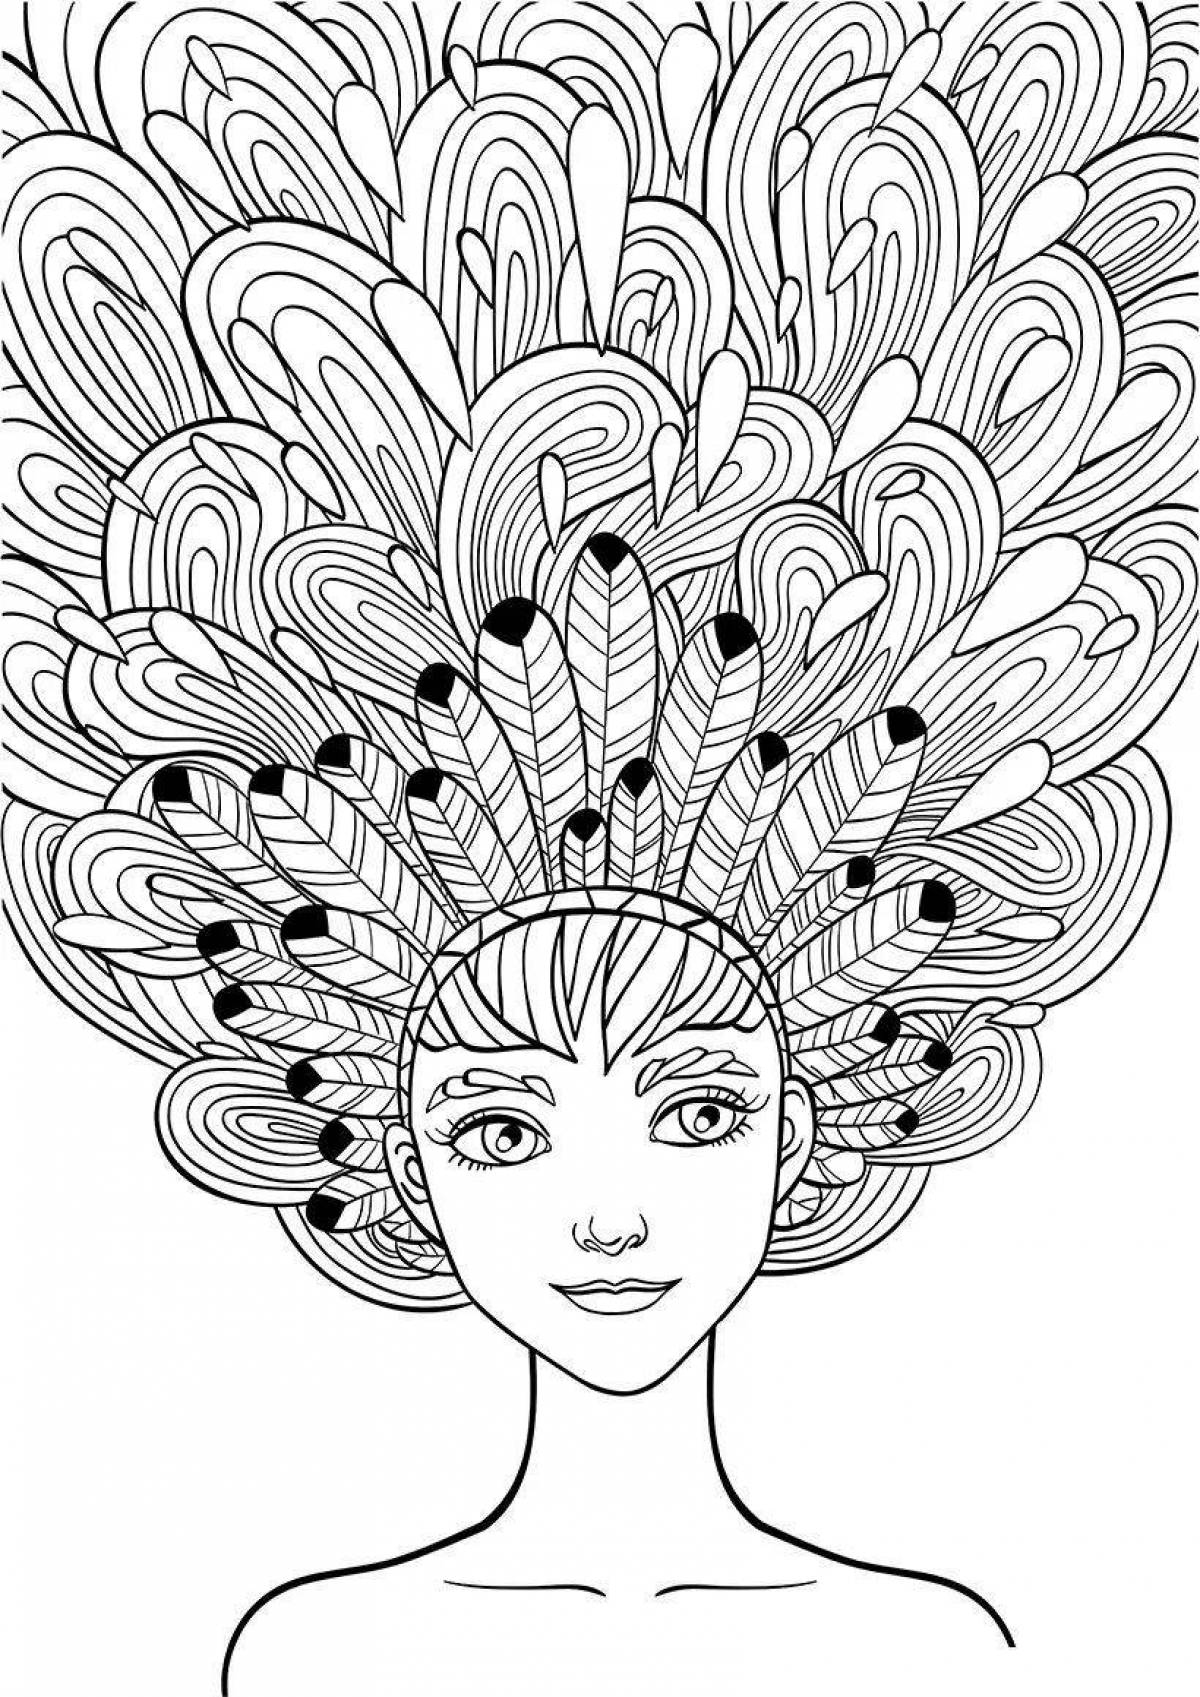 Coloring book glowing anti-stress art therapy